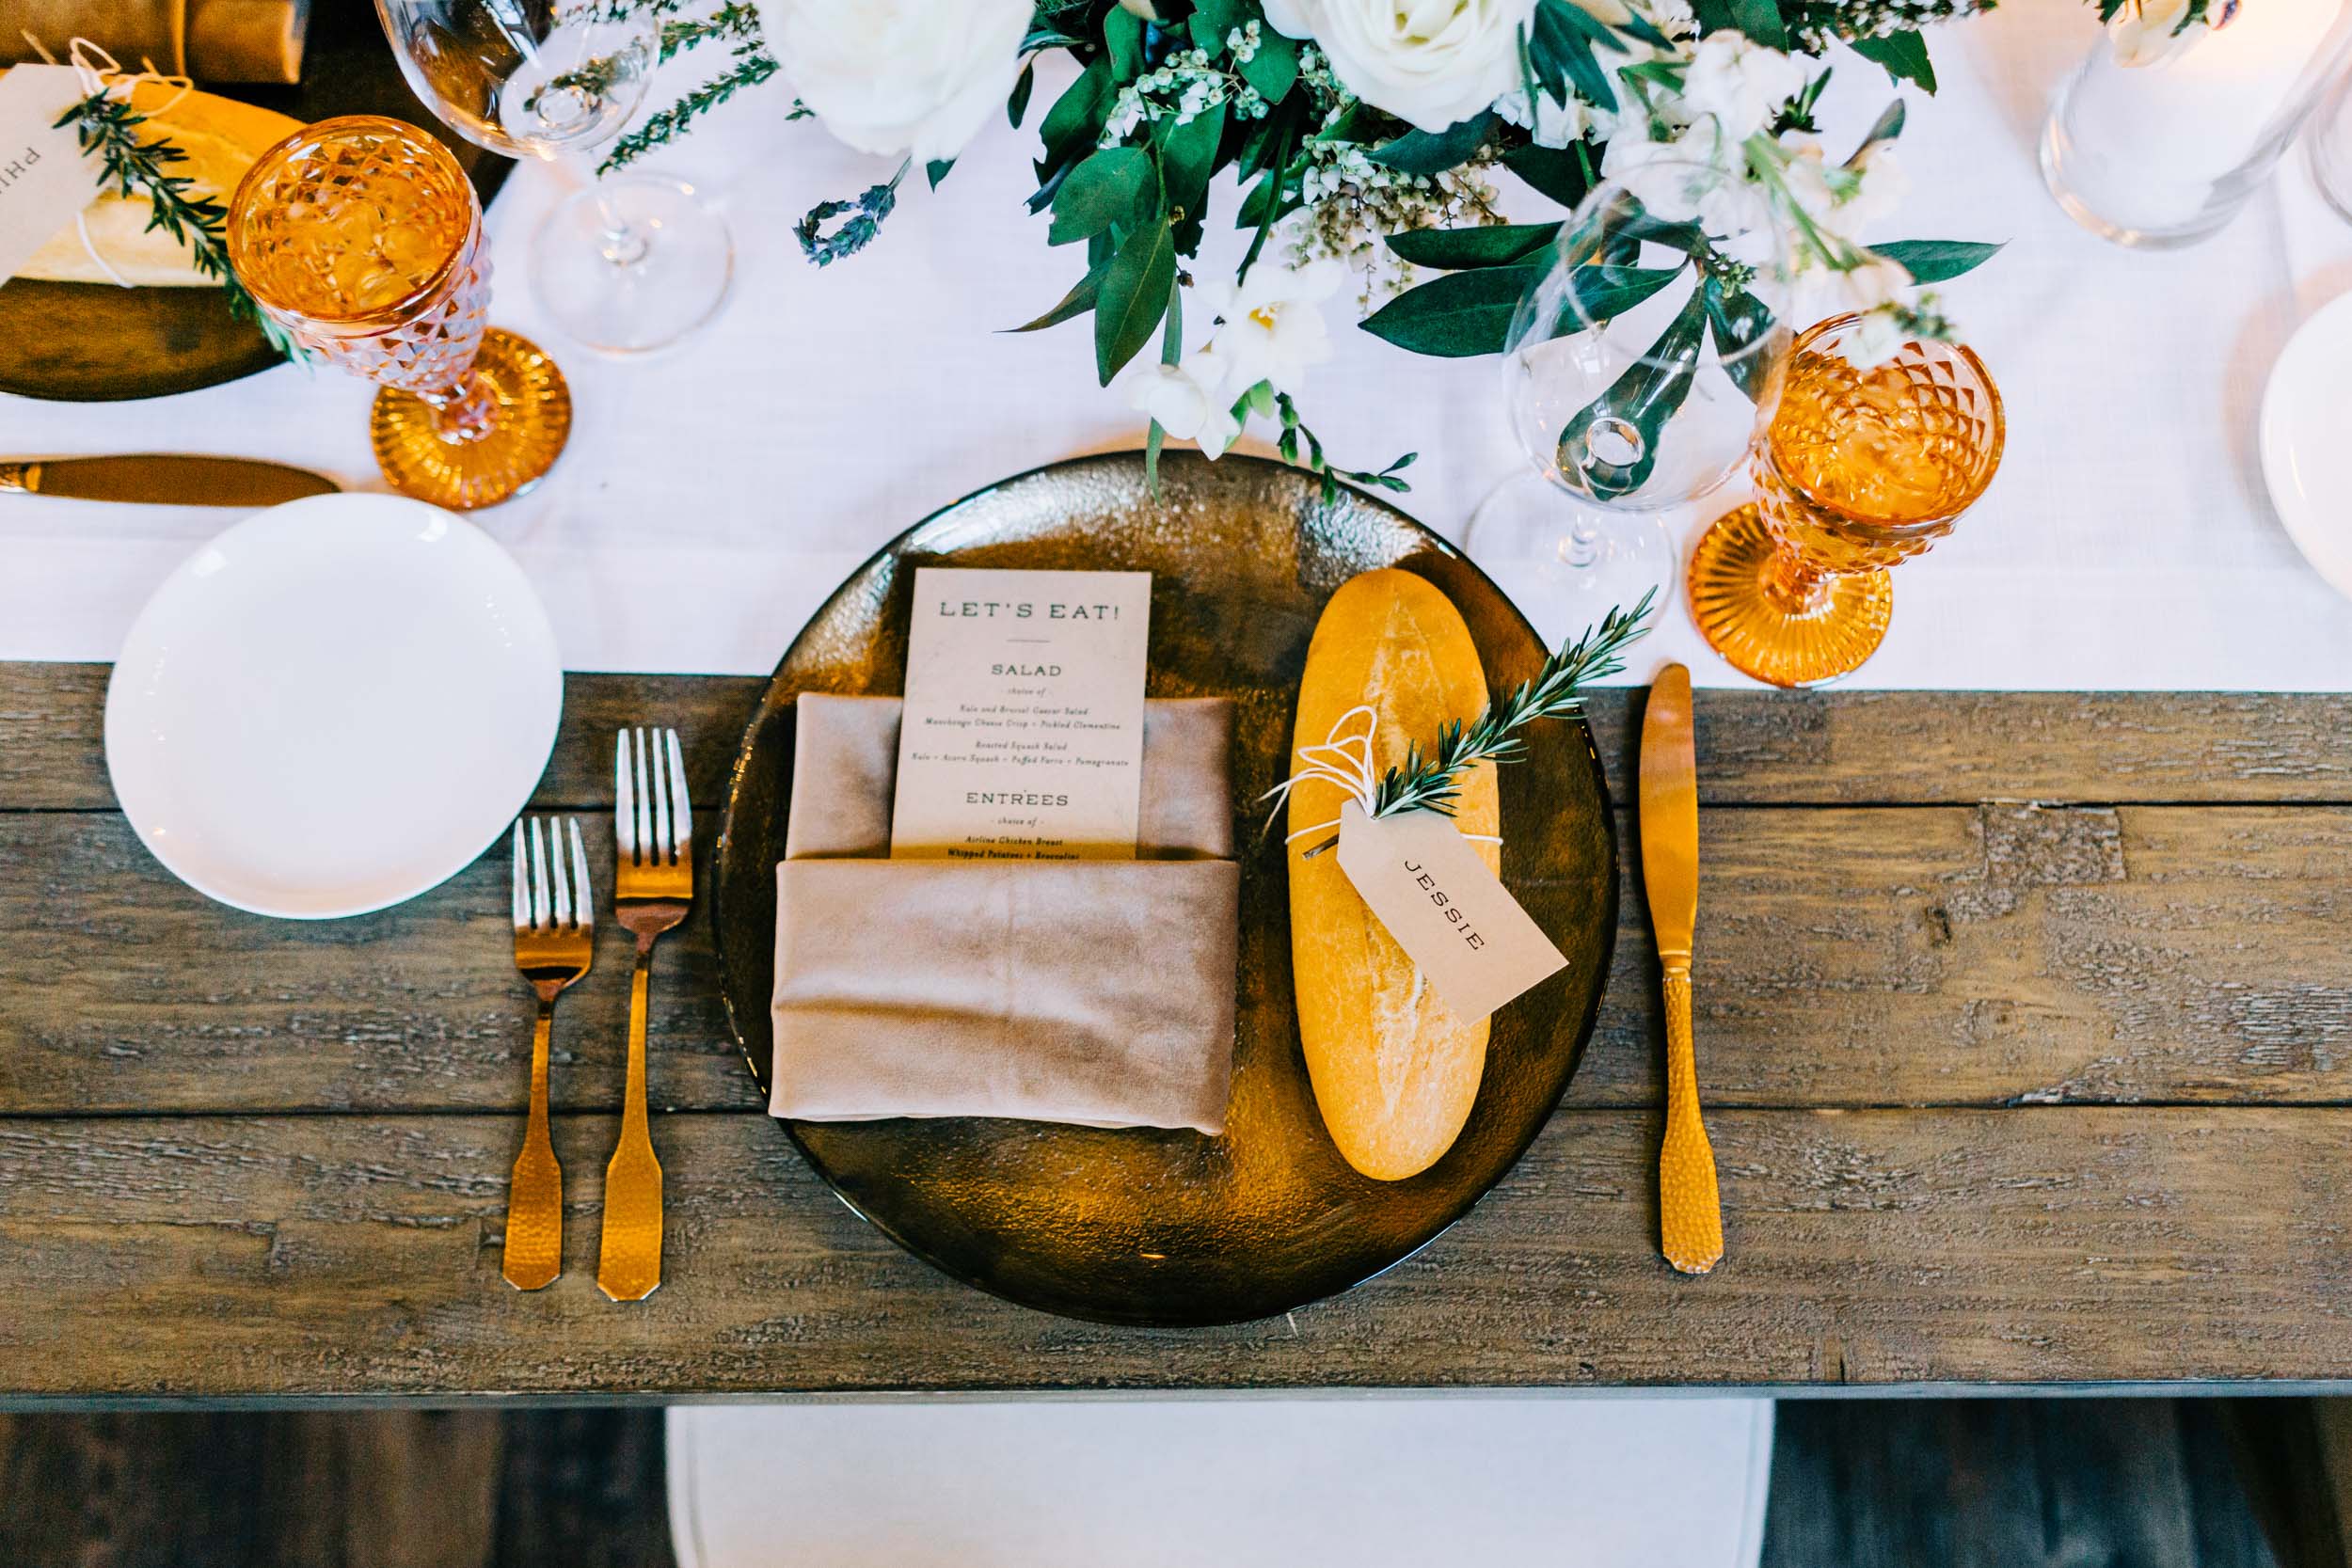 Gold place setting design ideas for wedding